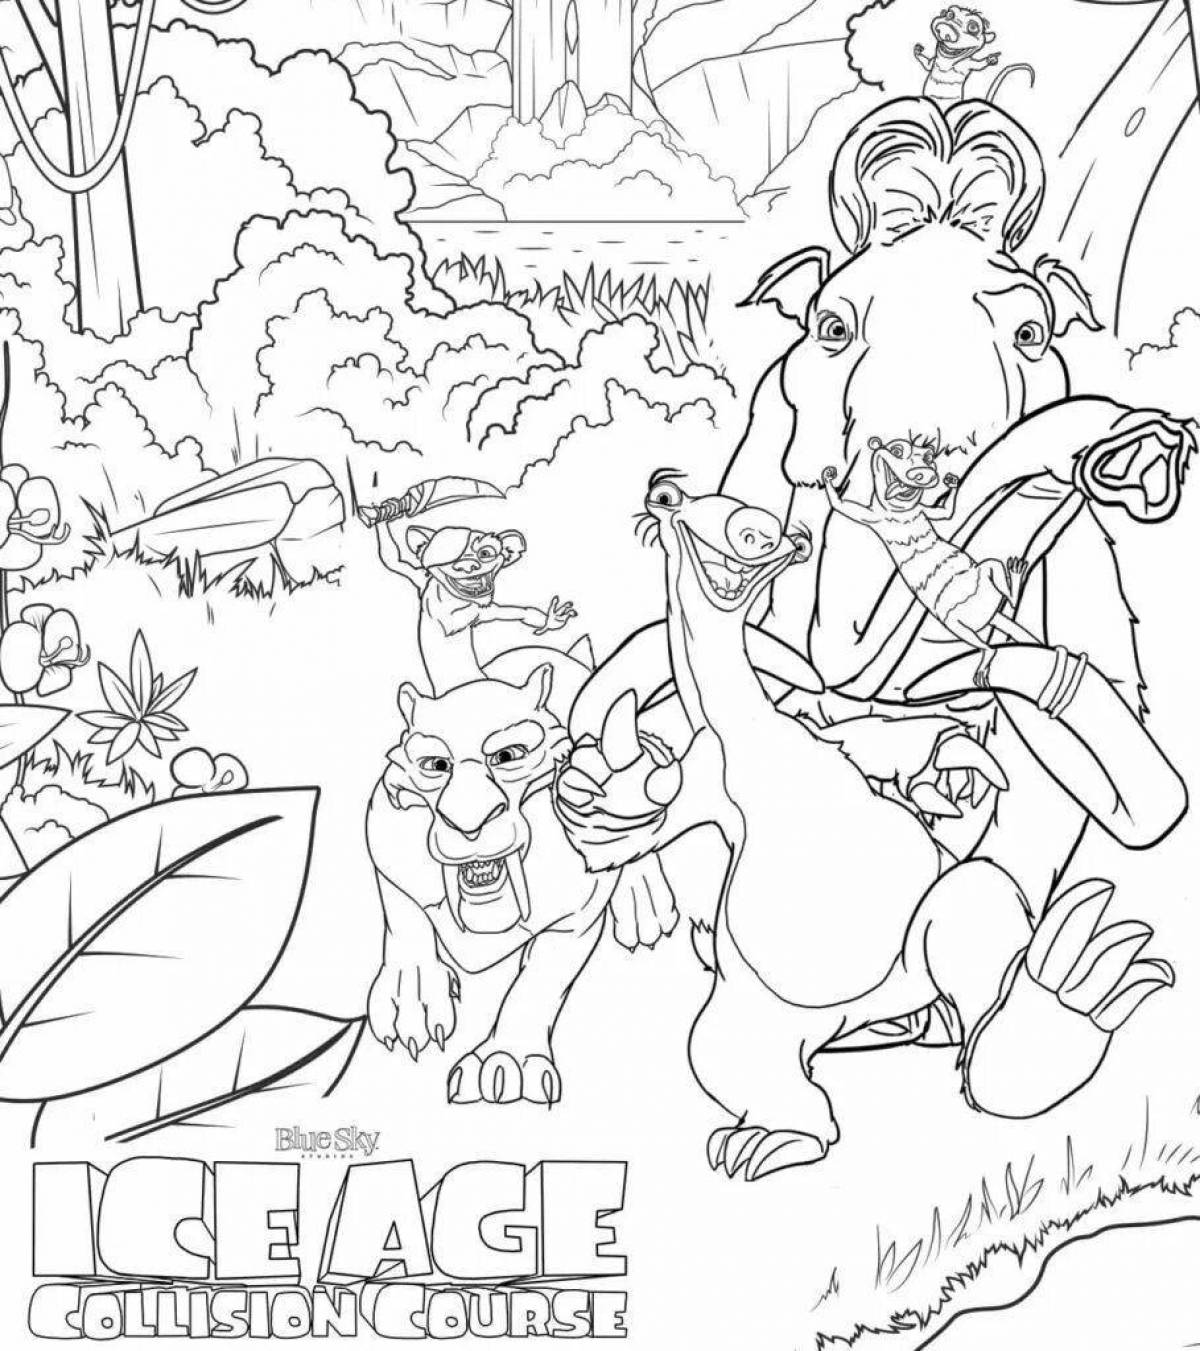 Awesome ice age 3 coloring book